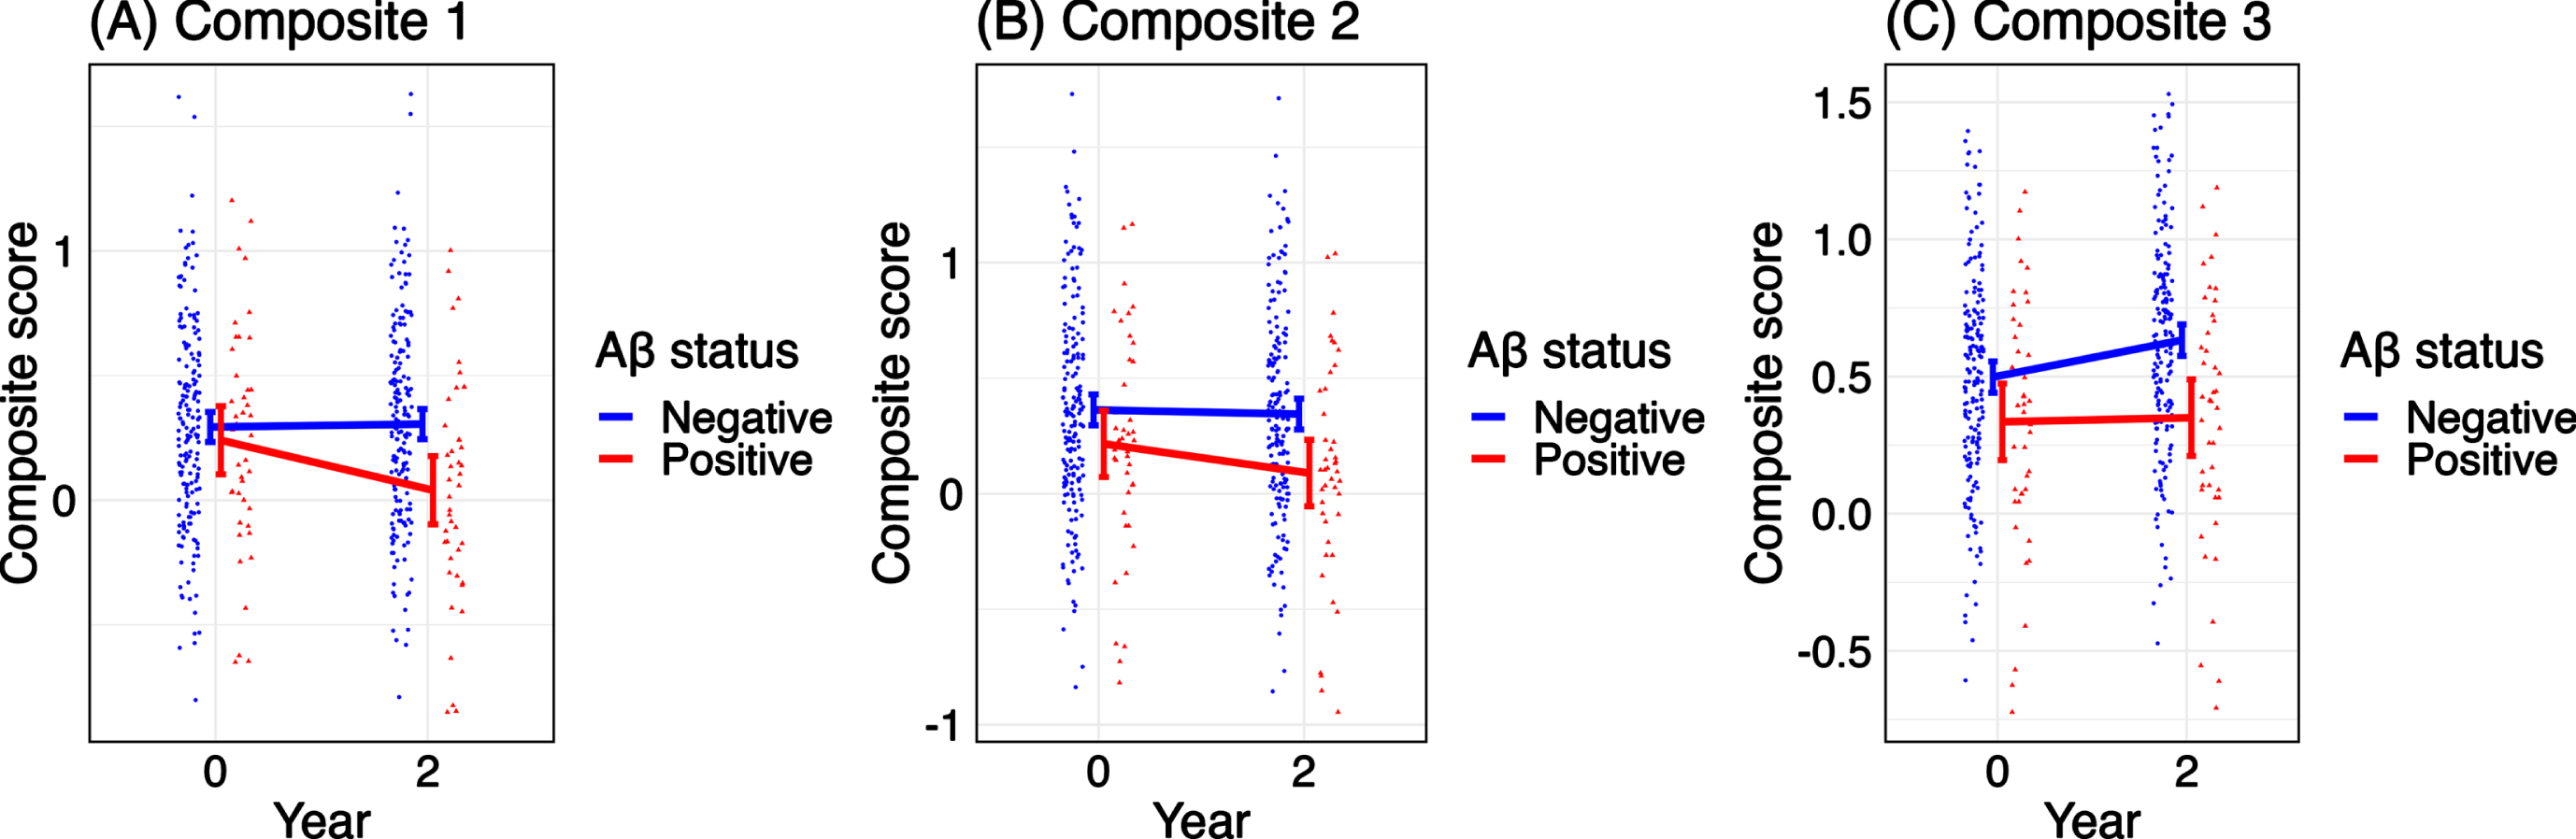 The results of the linear mixed models of time and Aβ interaction for each candidate composites. (A) Composite 1. (B) Composite 2. (C) Composite 3. The bars indicate 95% confidence intervals. The fixed effect of the interaction of time and Aβ status was significant only for Composite 1(A).